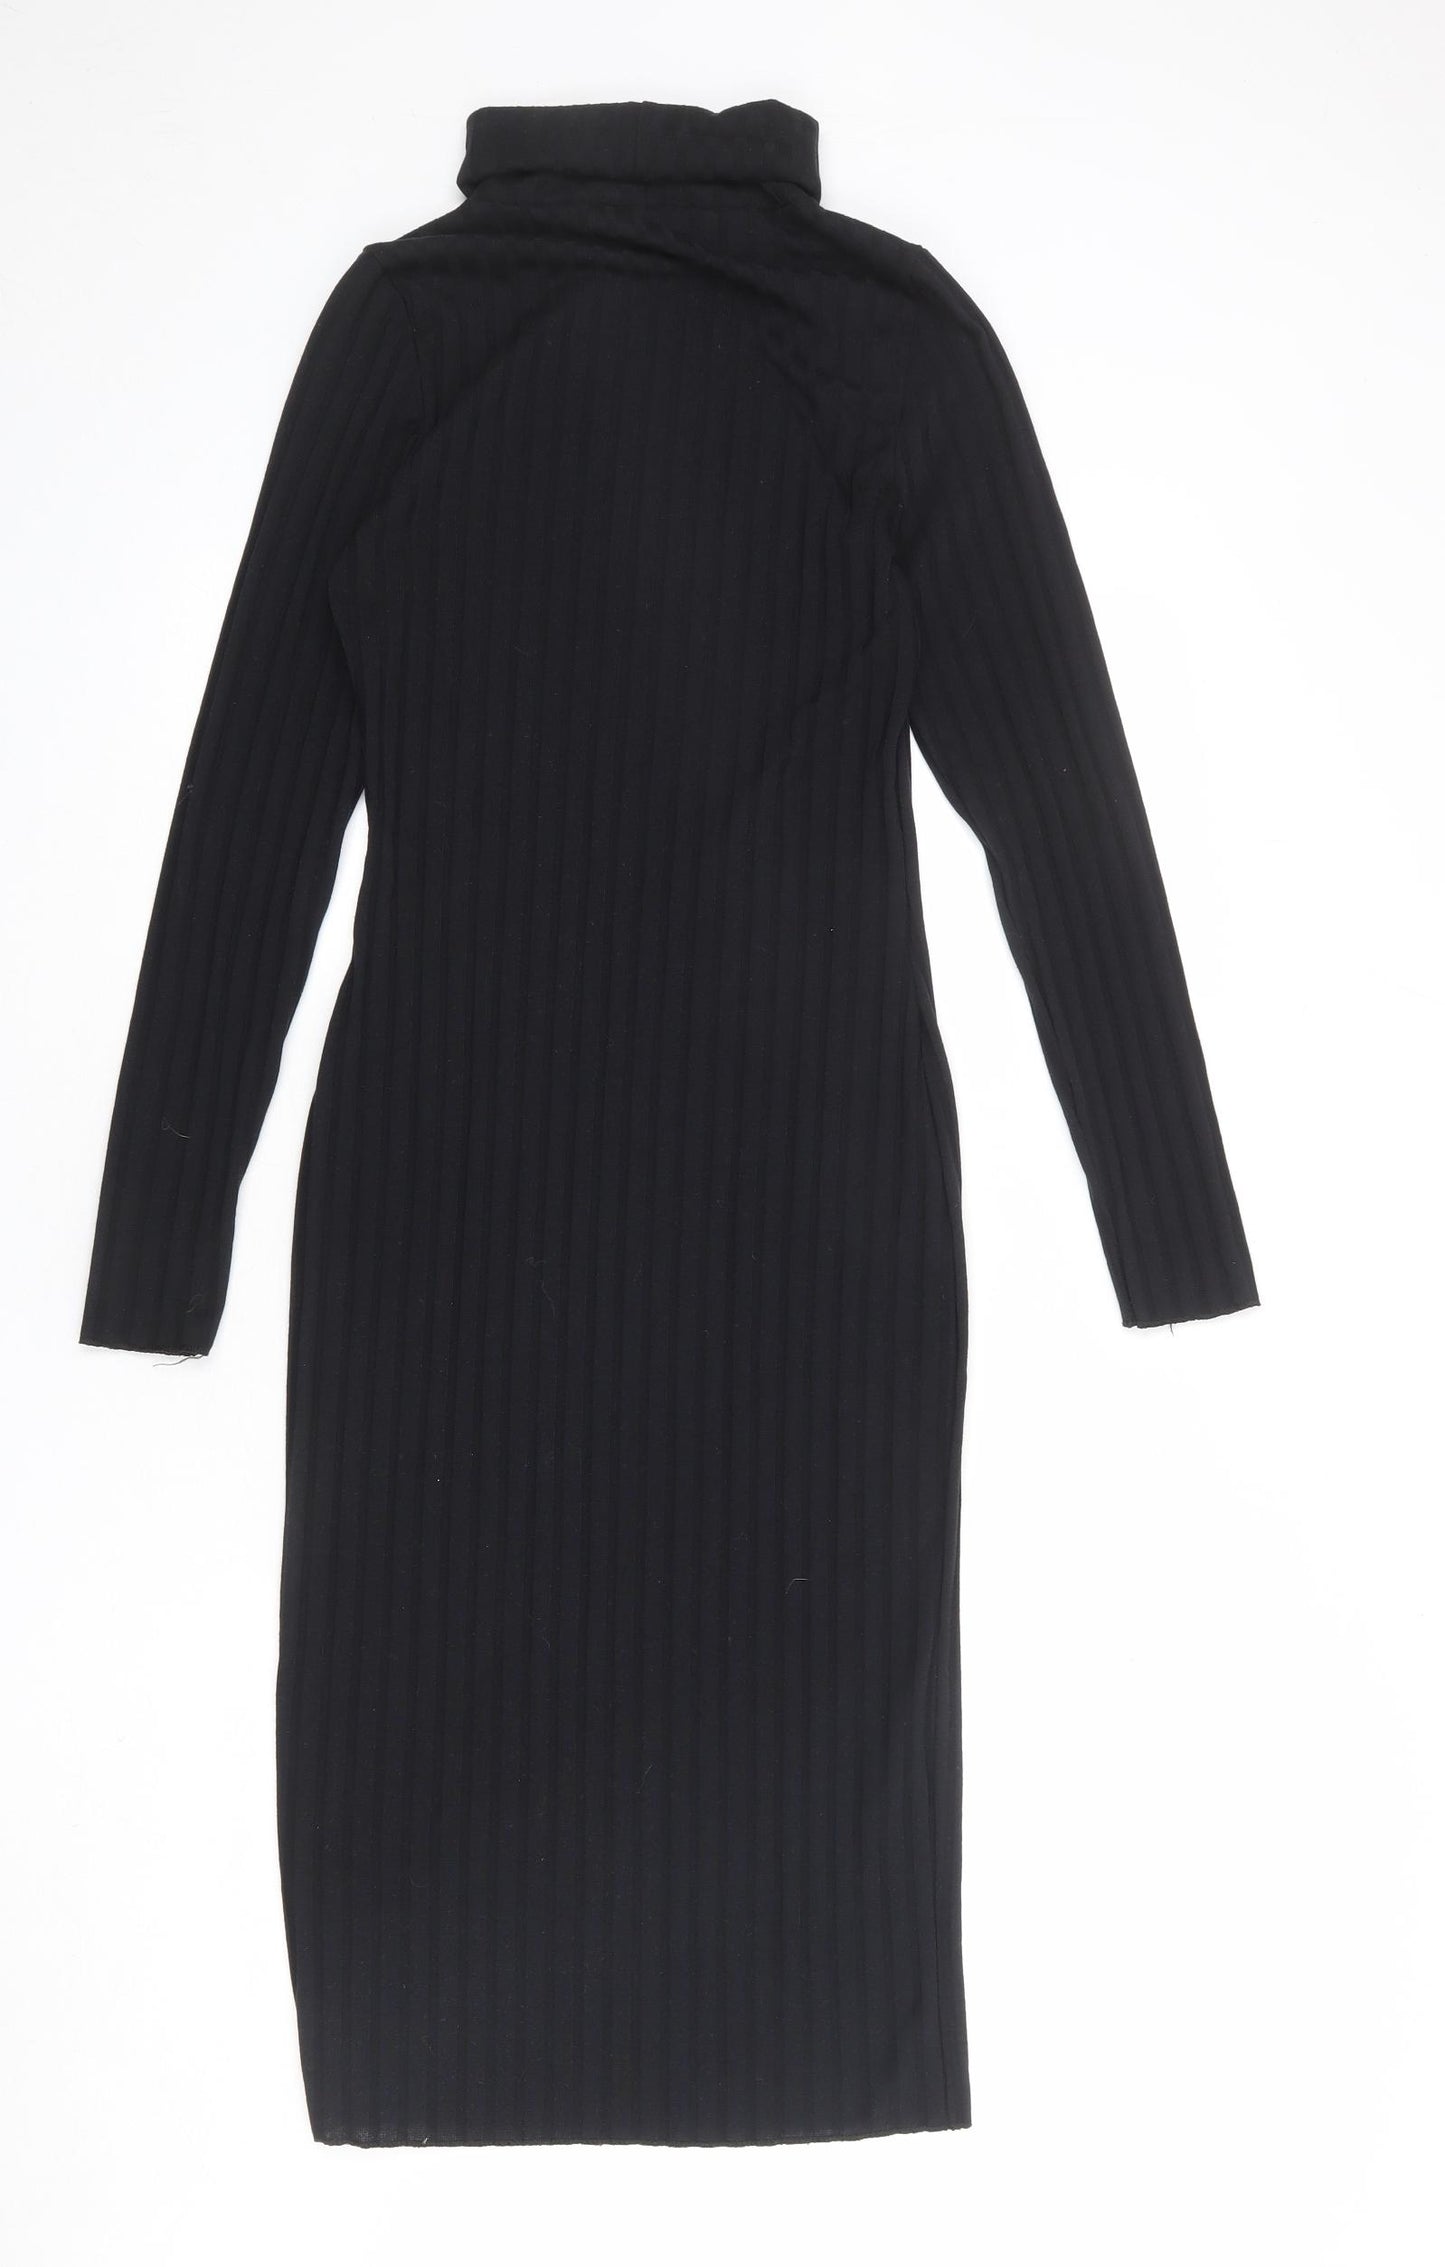 Missguided Womens Black Polyester Jumper Dress Size 10 Roll Neck Pullover - Ribbed